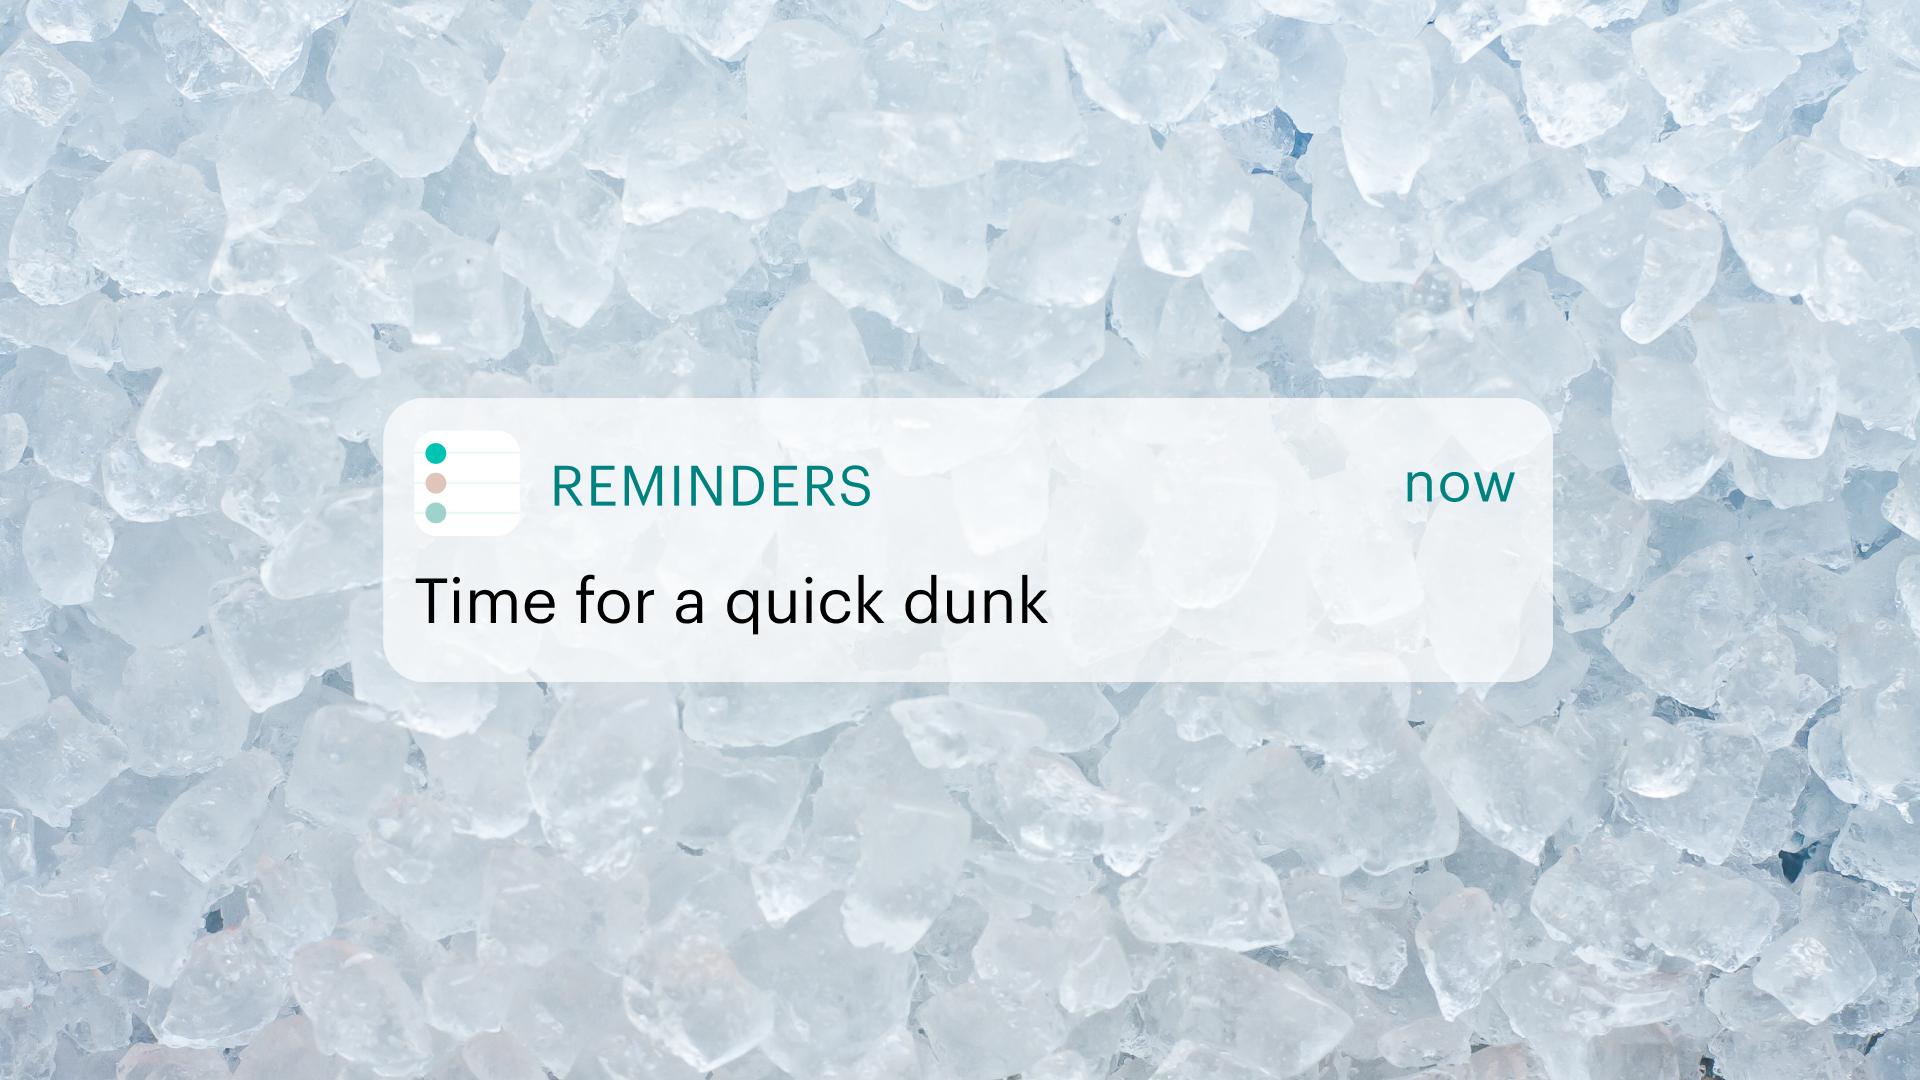 A reminder that says "time for a quick dunk" in front of an image of ice cubes